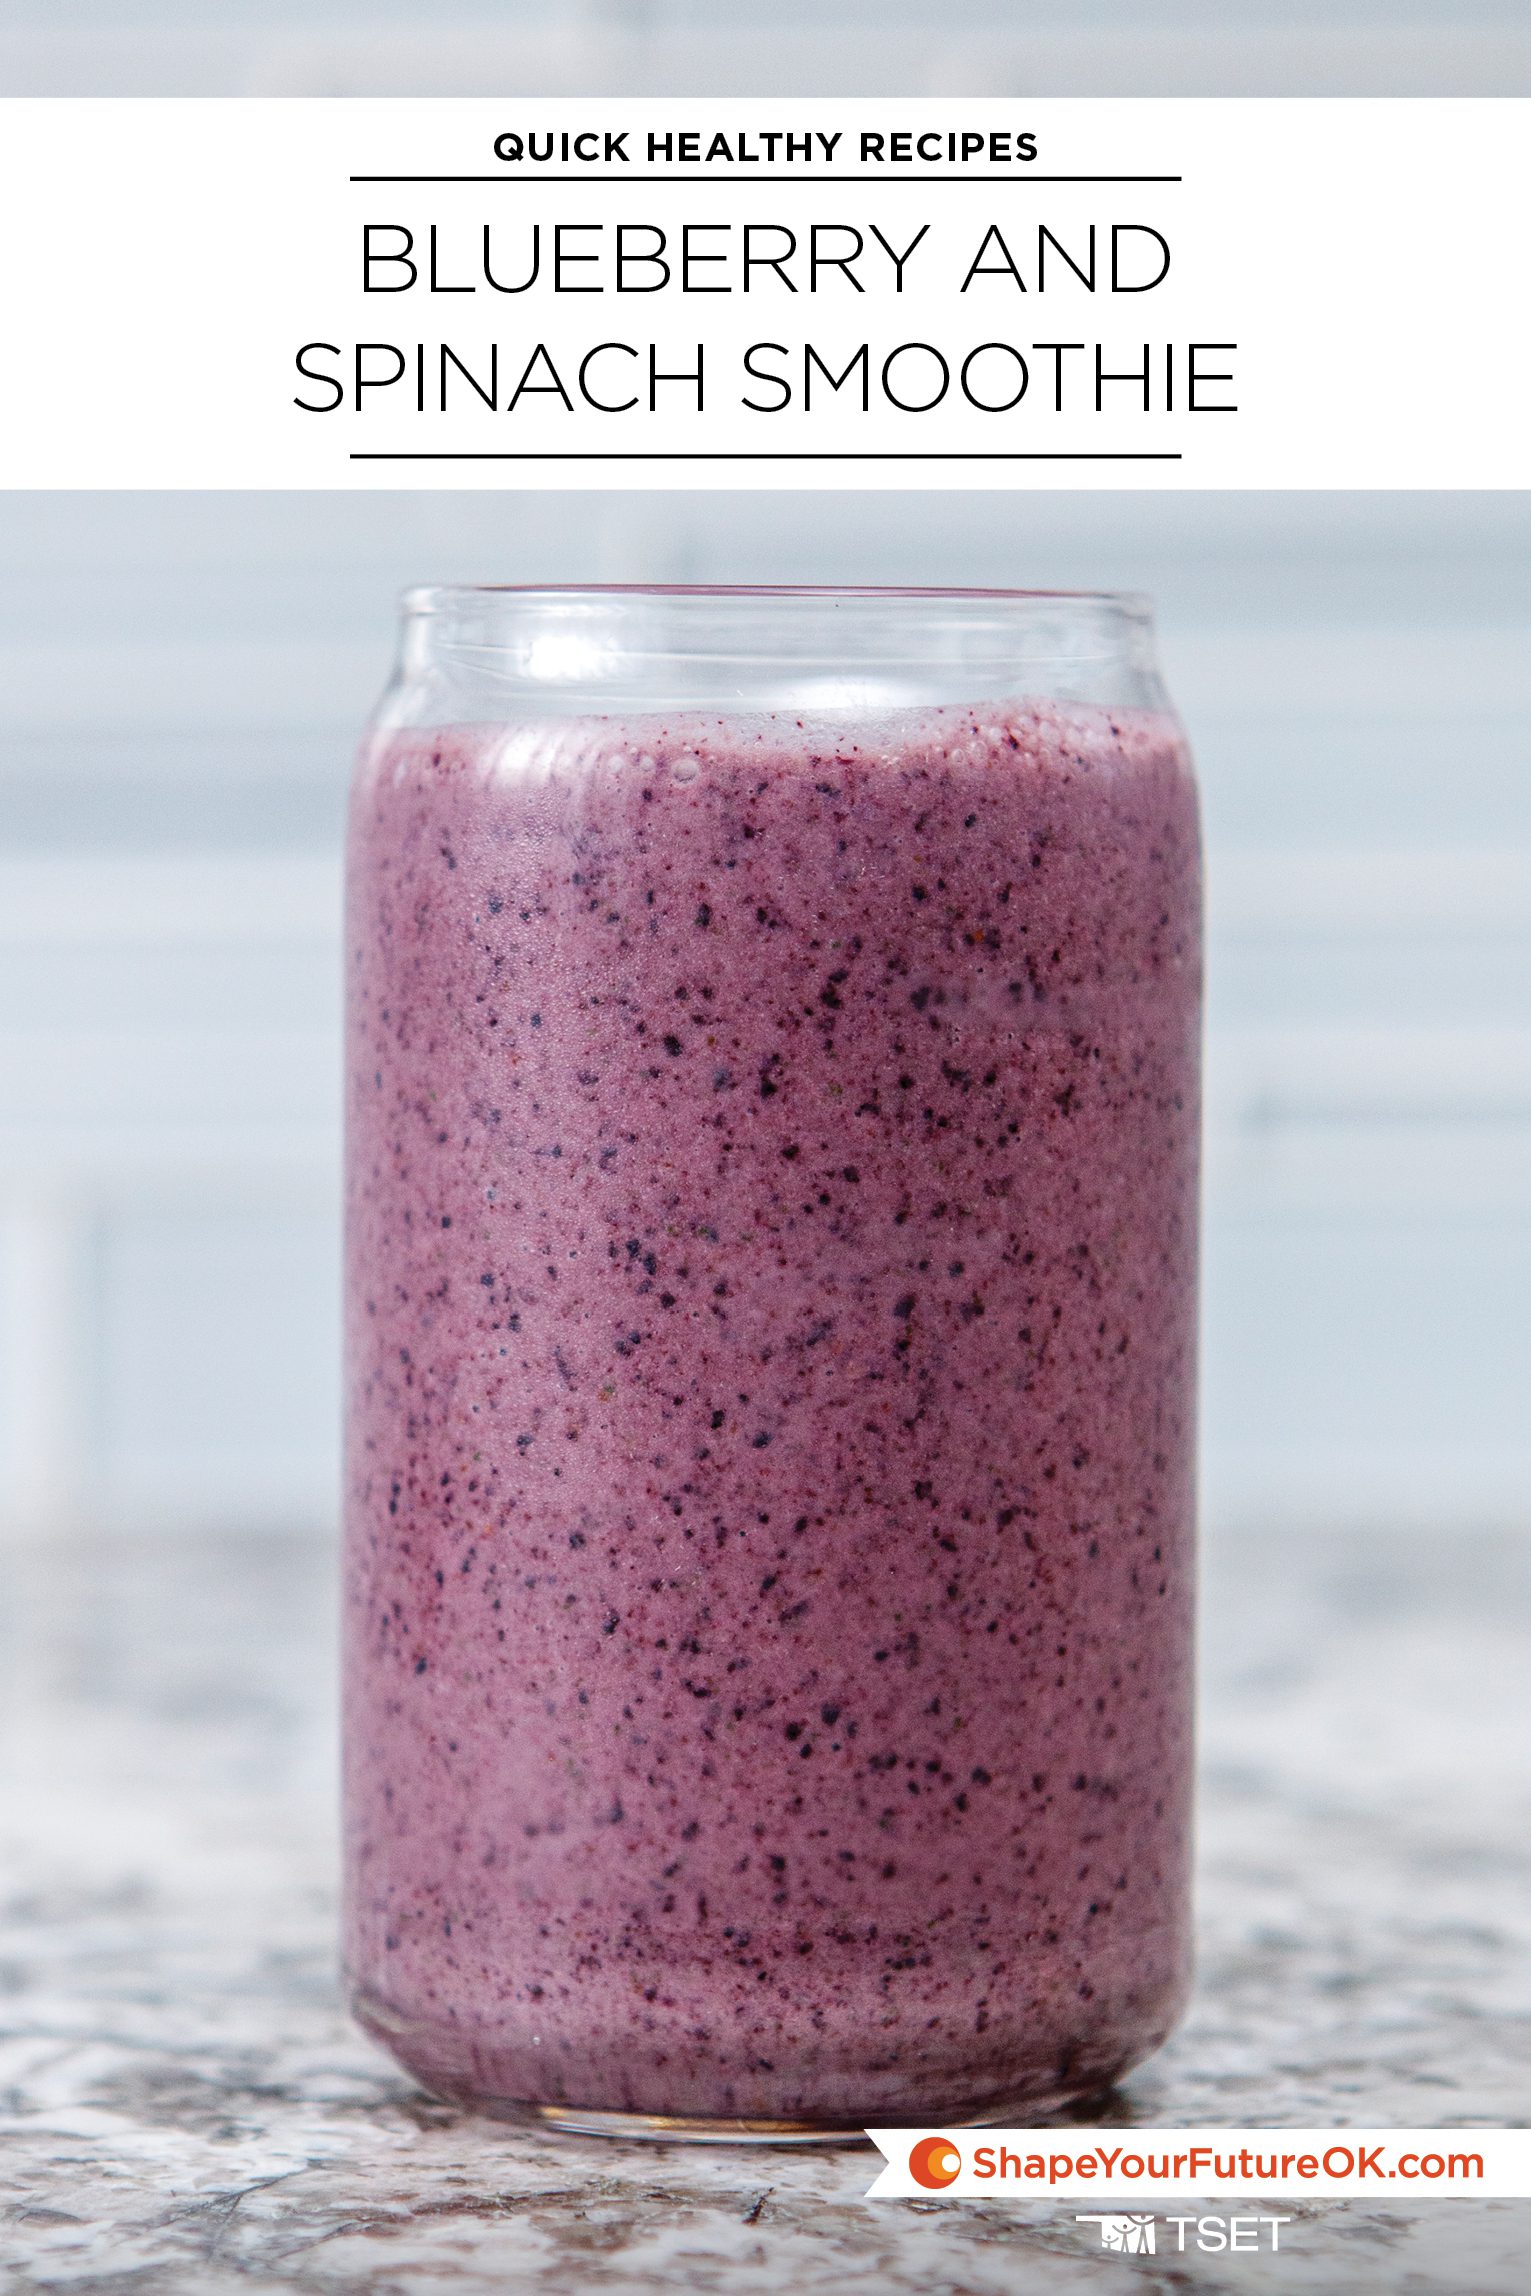 Blueberry and spinach smoothie quick and healthy recipe